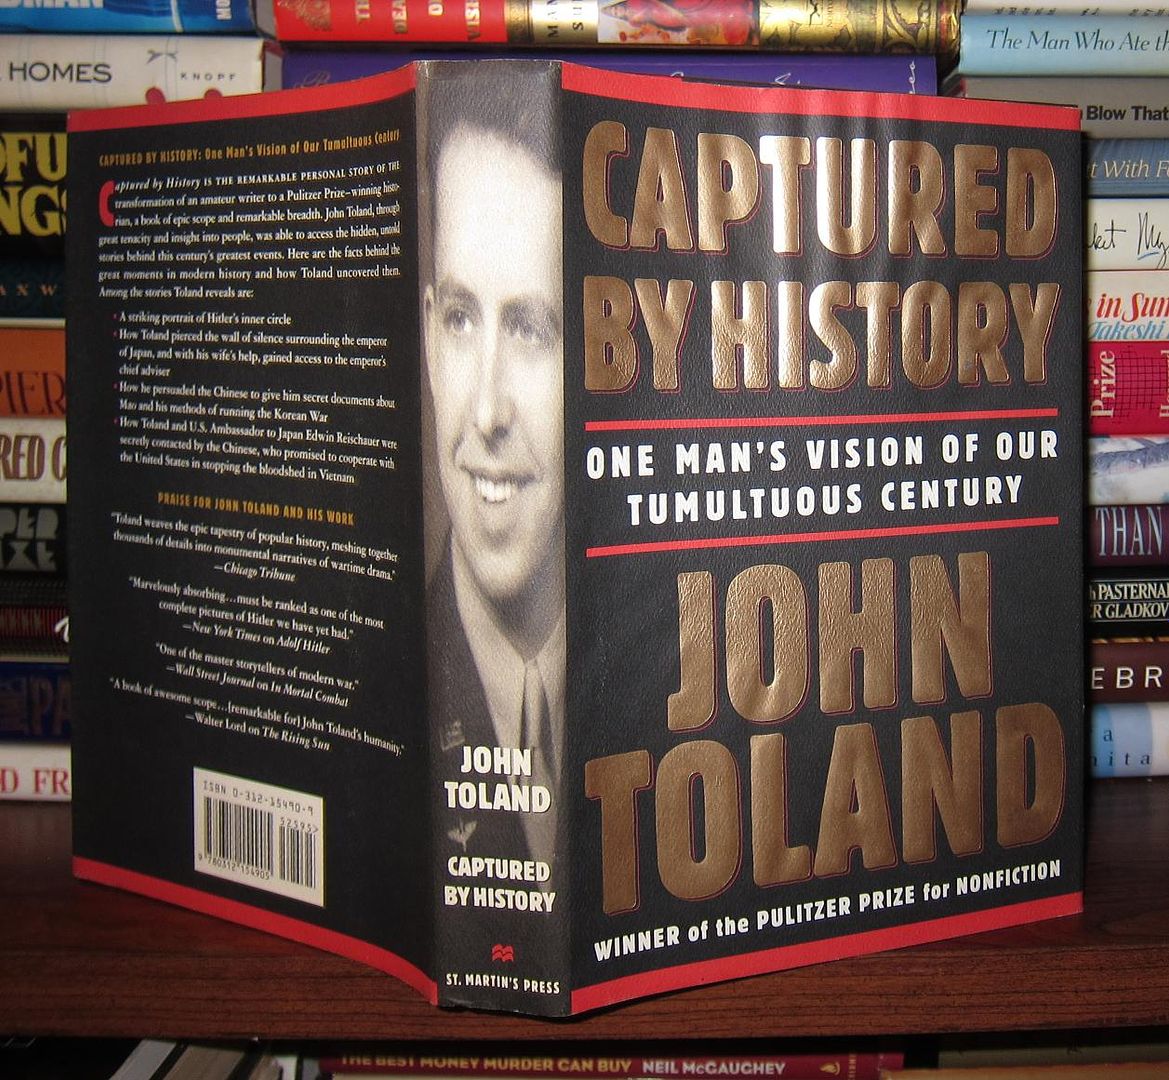 TOLAND, JOHN - Captured by History One Man's Vision of Our Tumultuous Century